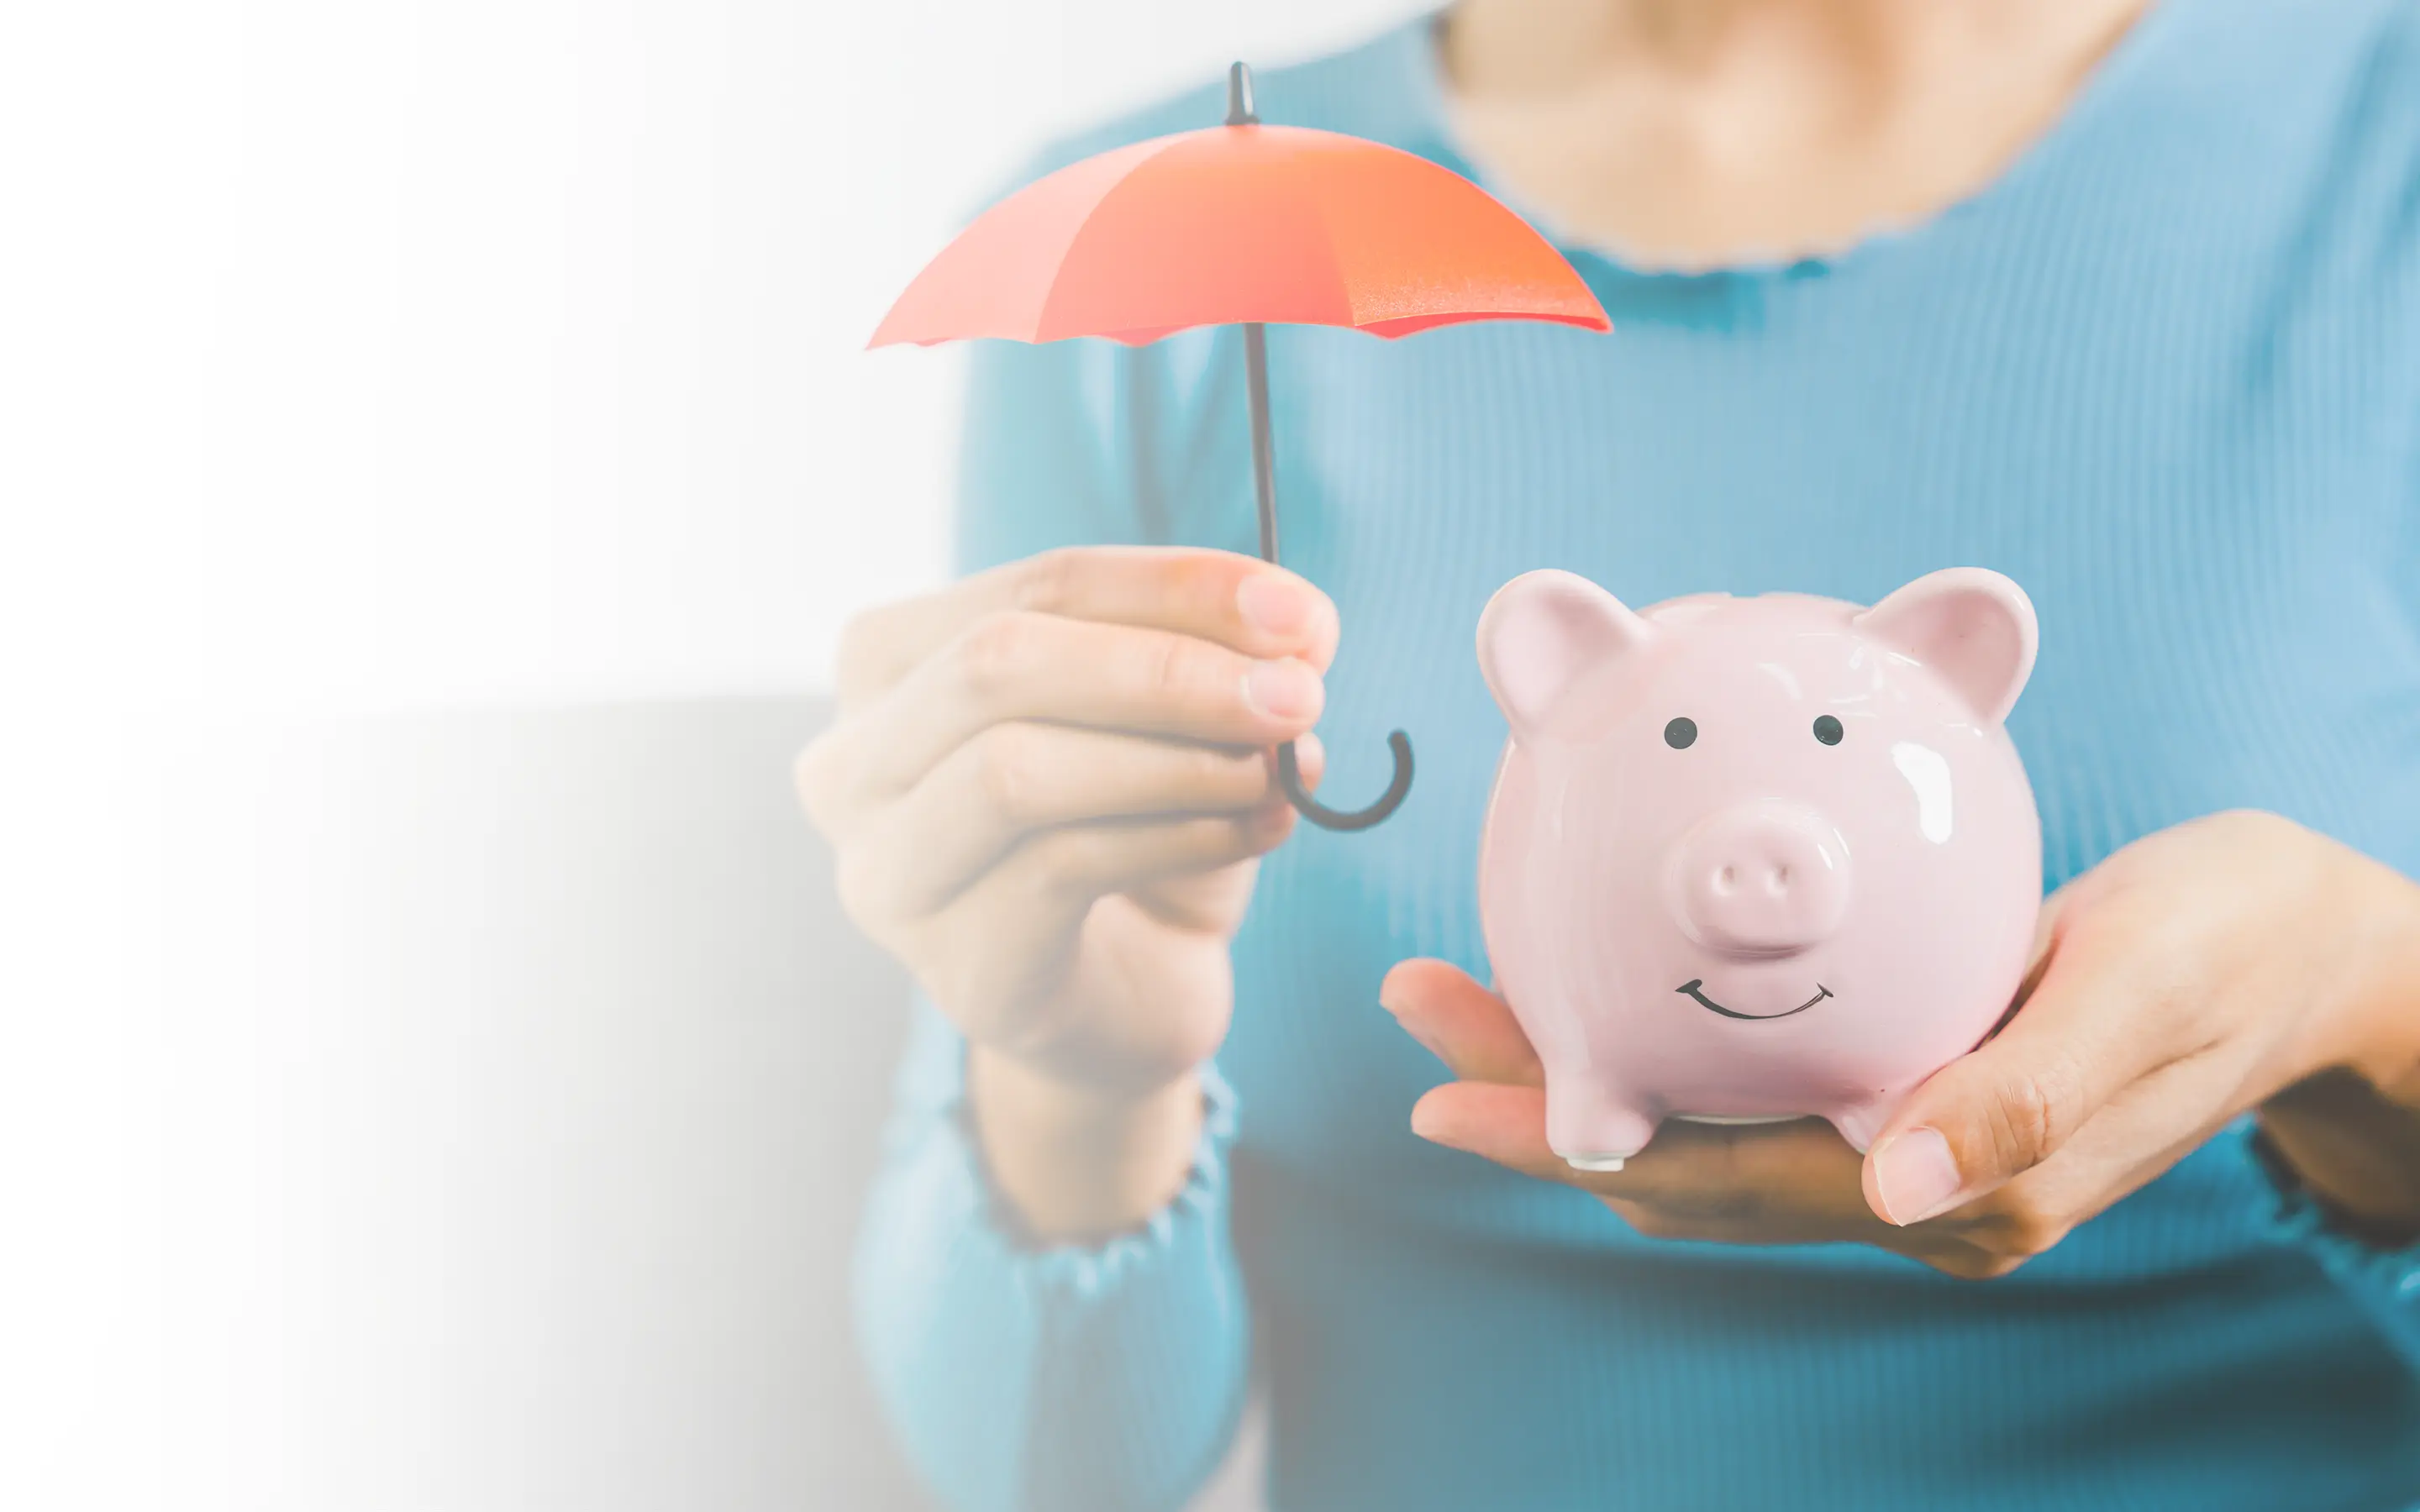 A woman holding a piggy bank and a red umbrella.